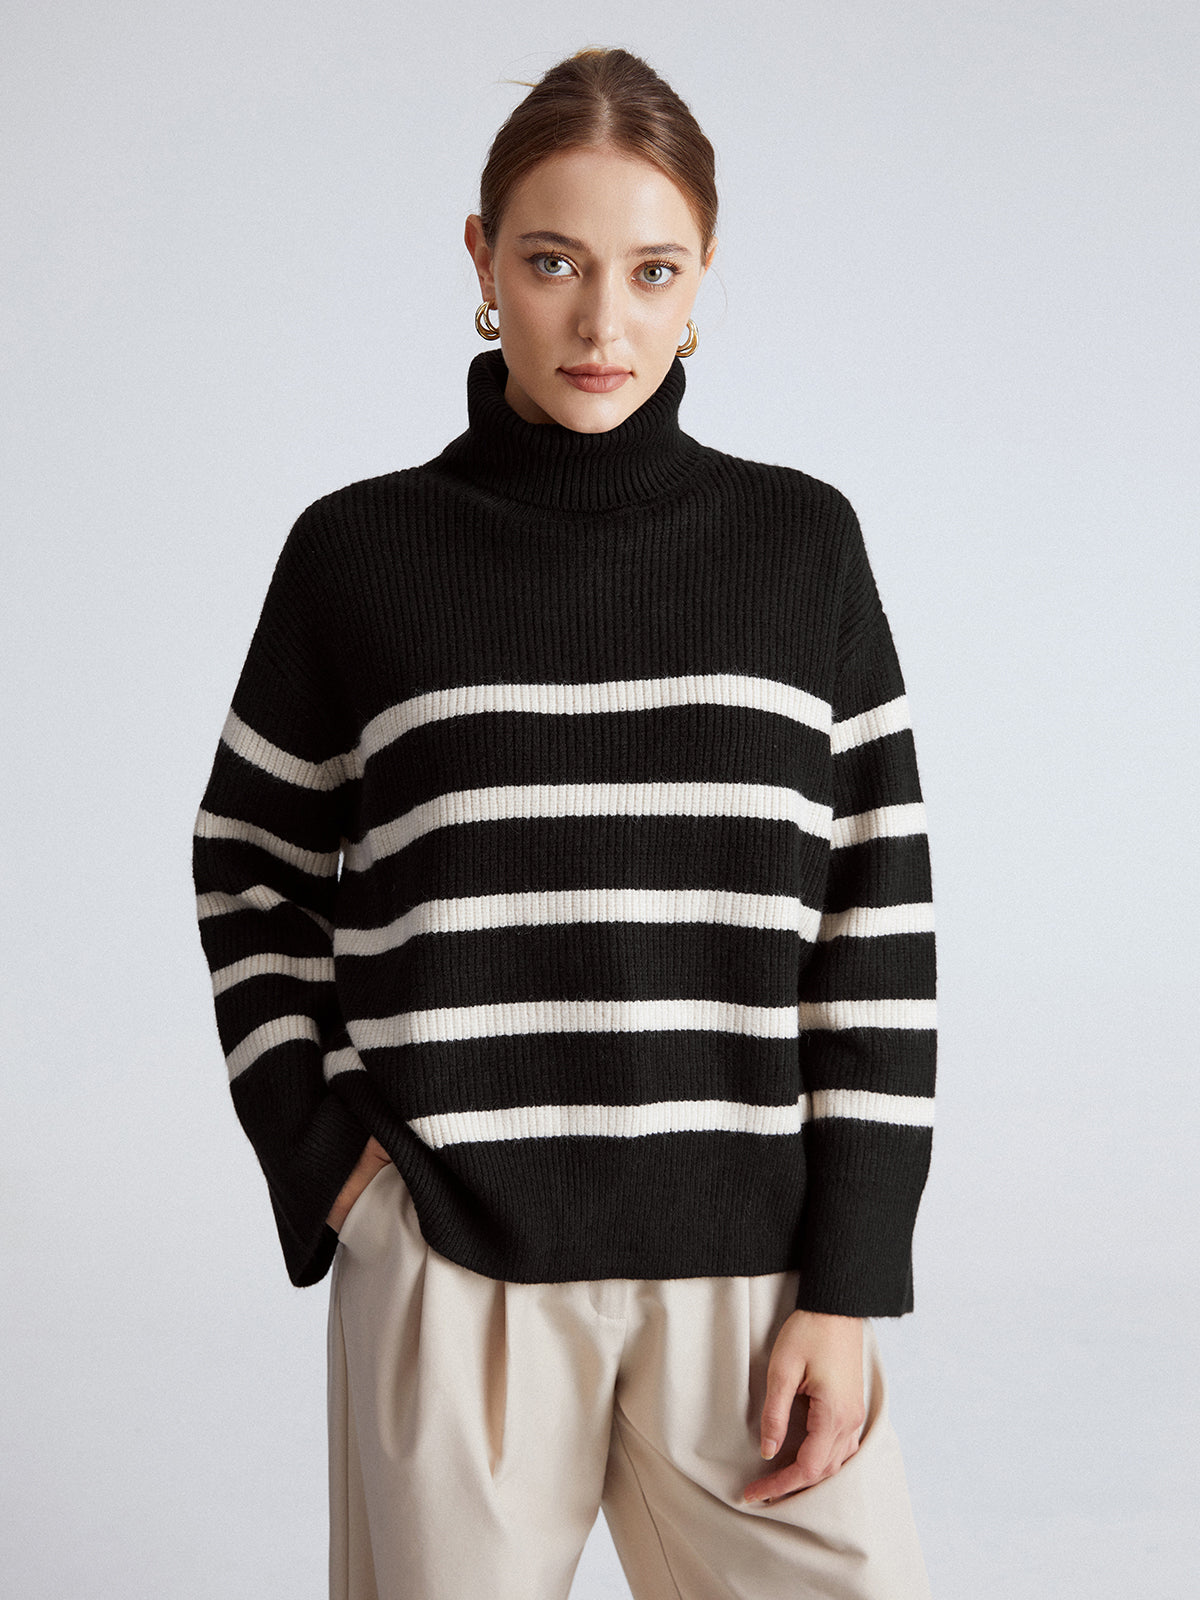 8 Ways To Dress Up Your Winter Knitwear